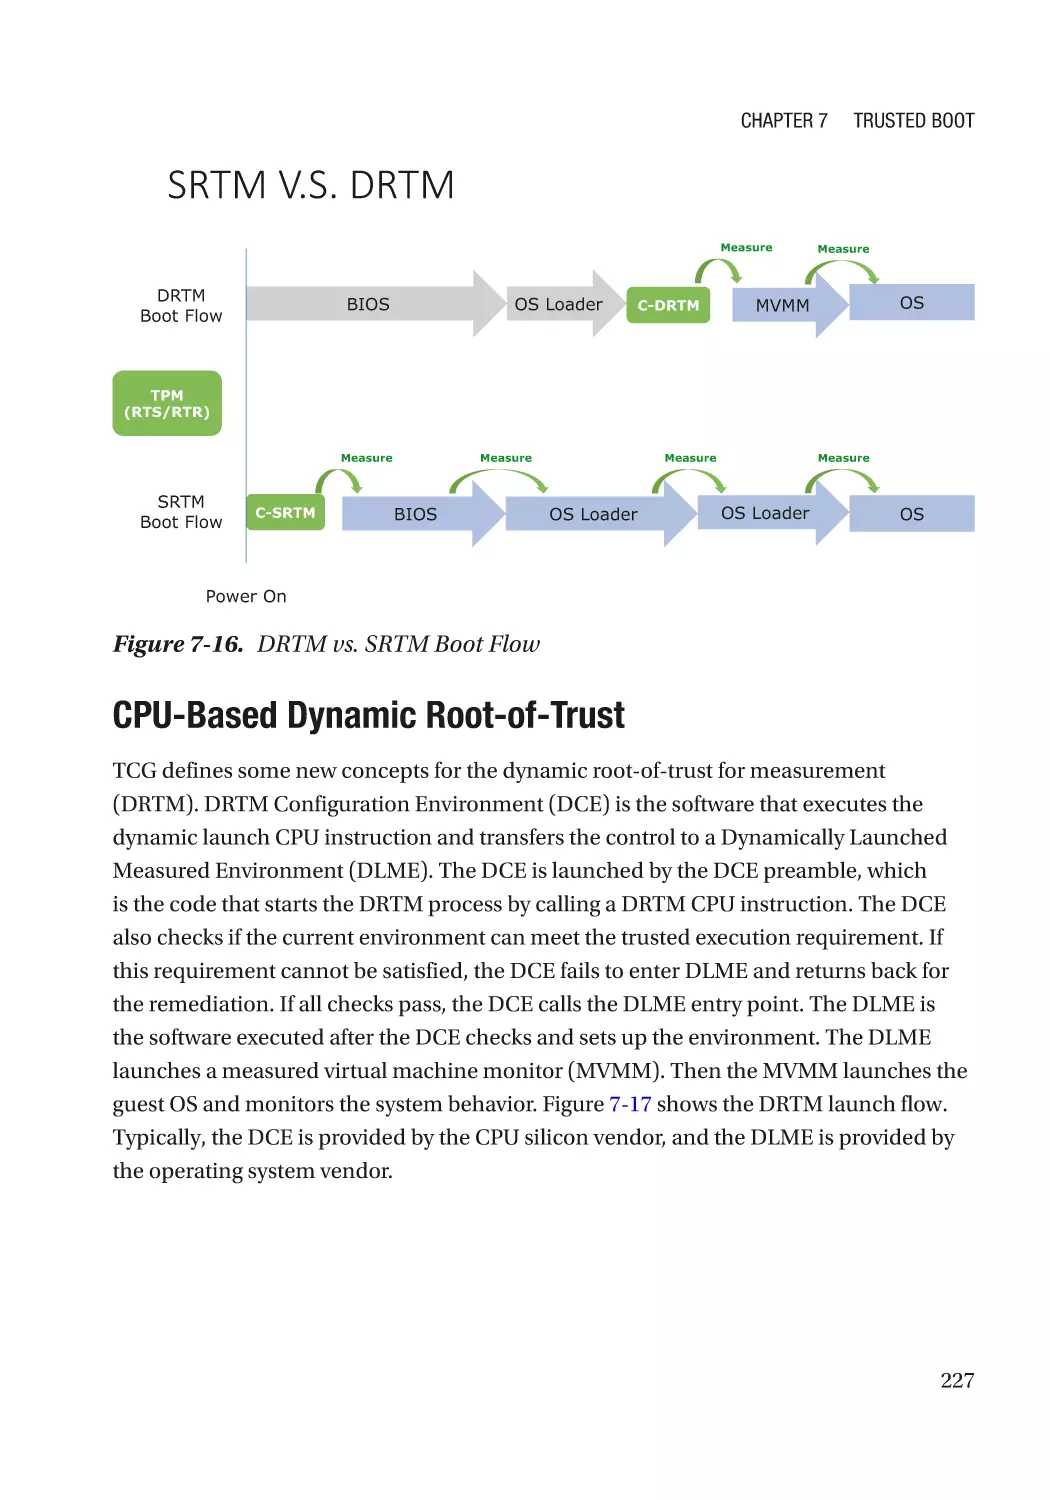 CPU-Based Dynamic Root-of-Trust